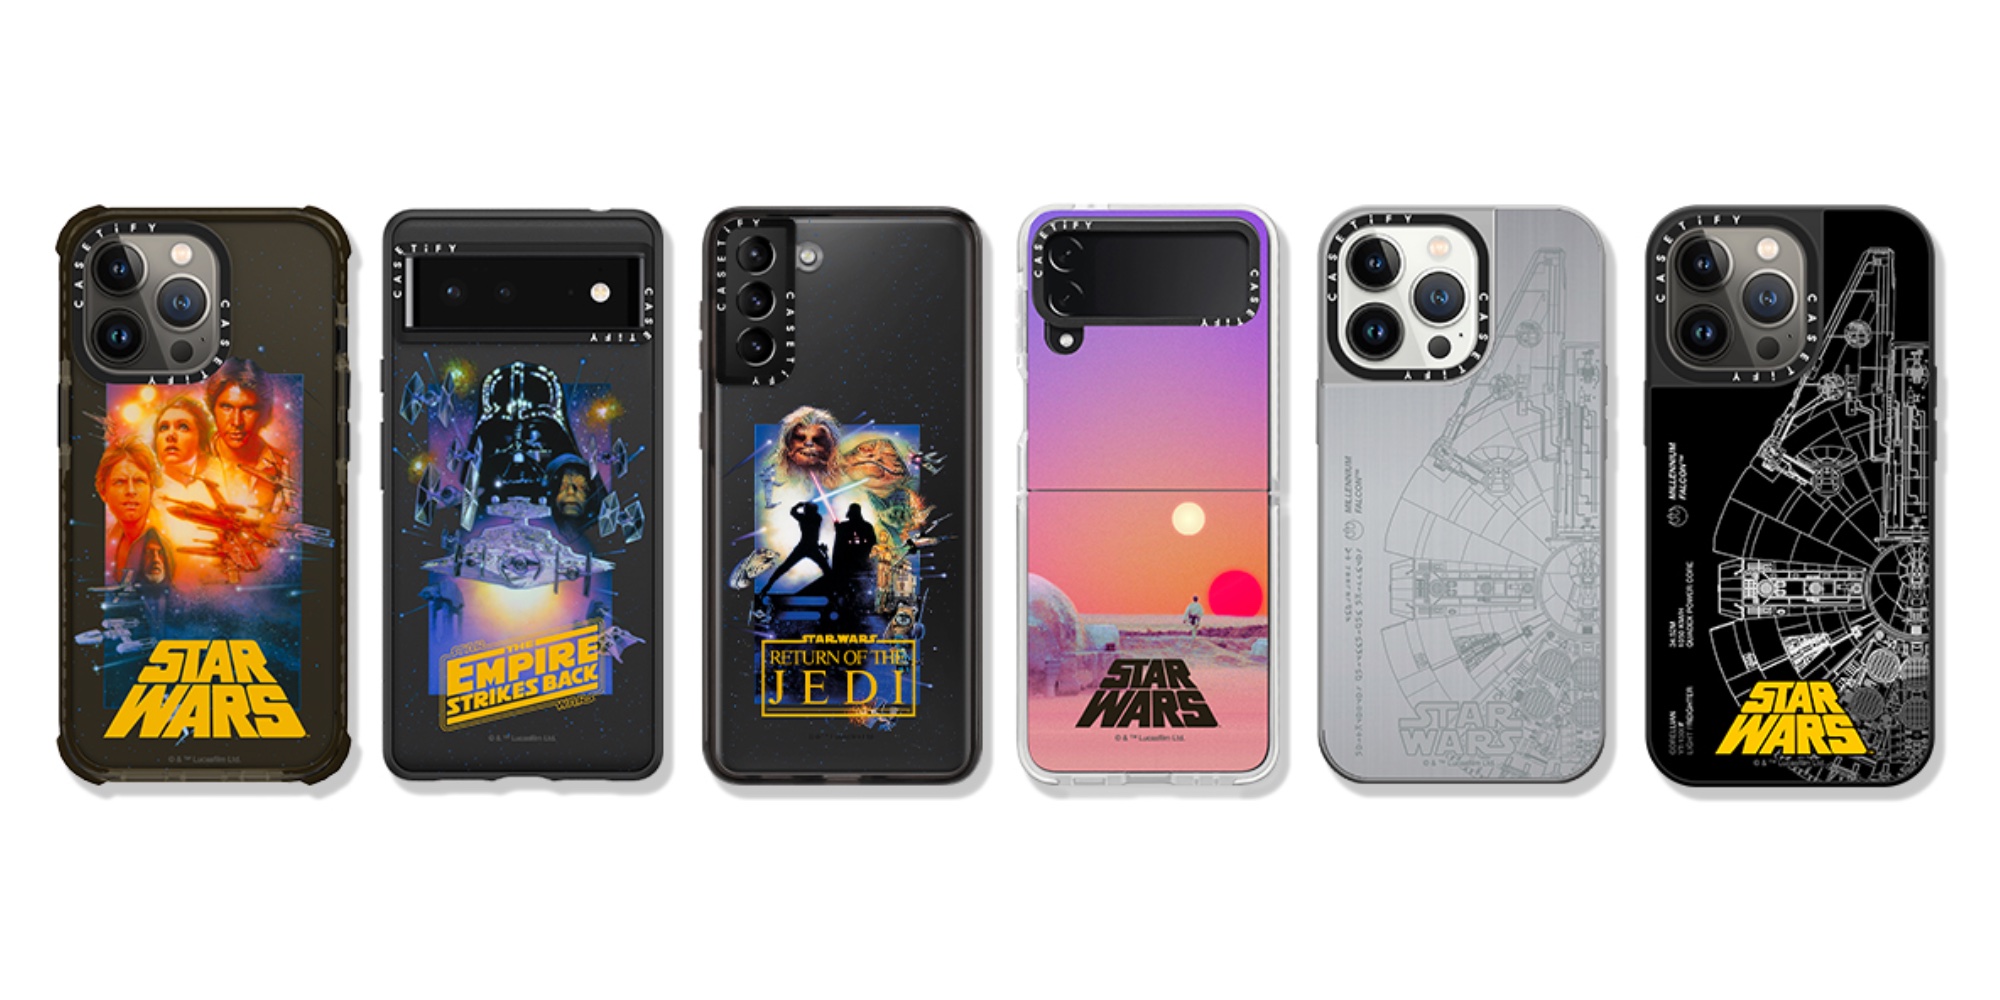 CASETiFY Star Wars iPhone 13 case collection revealed - 9to5Toys